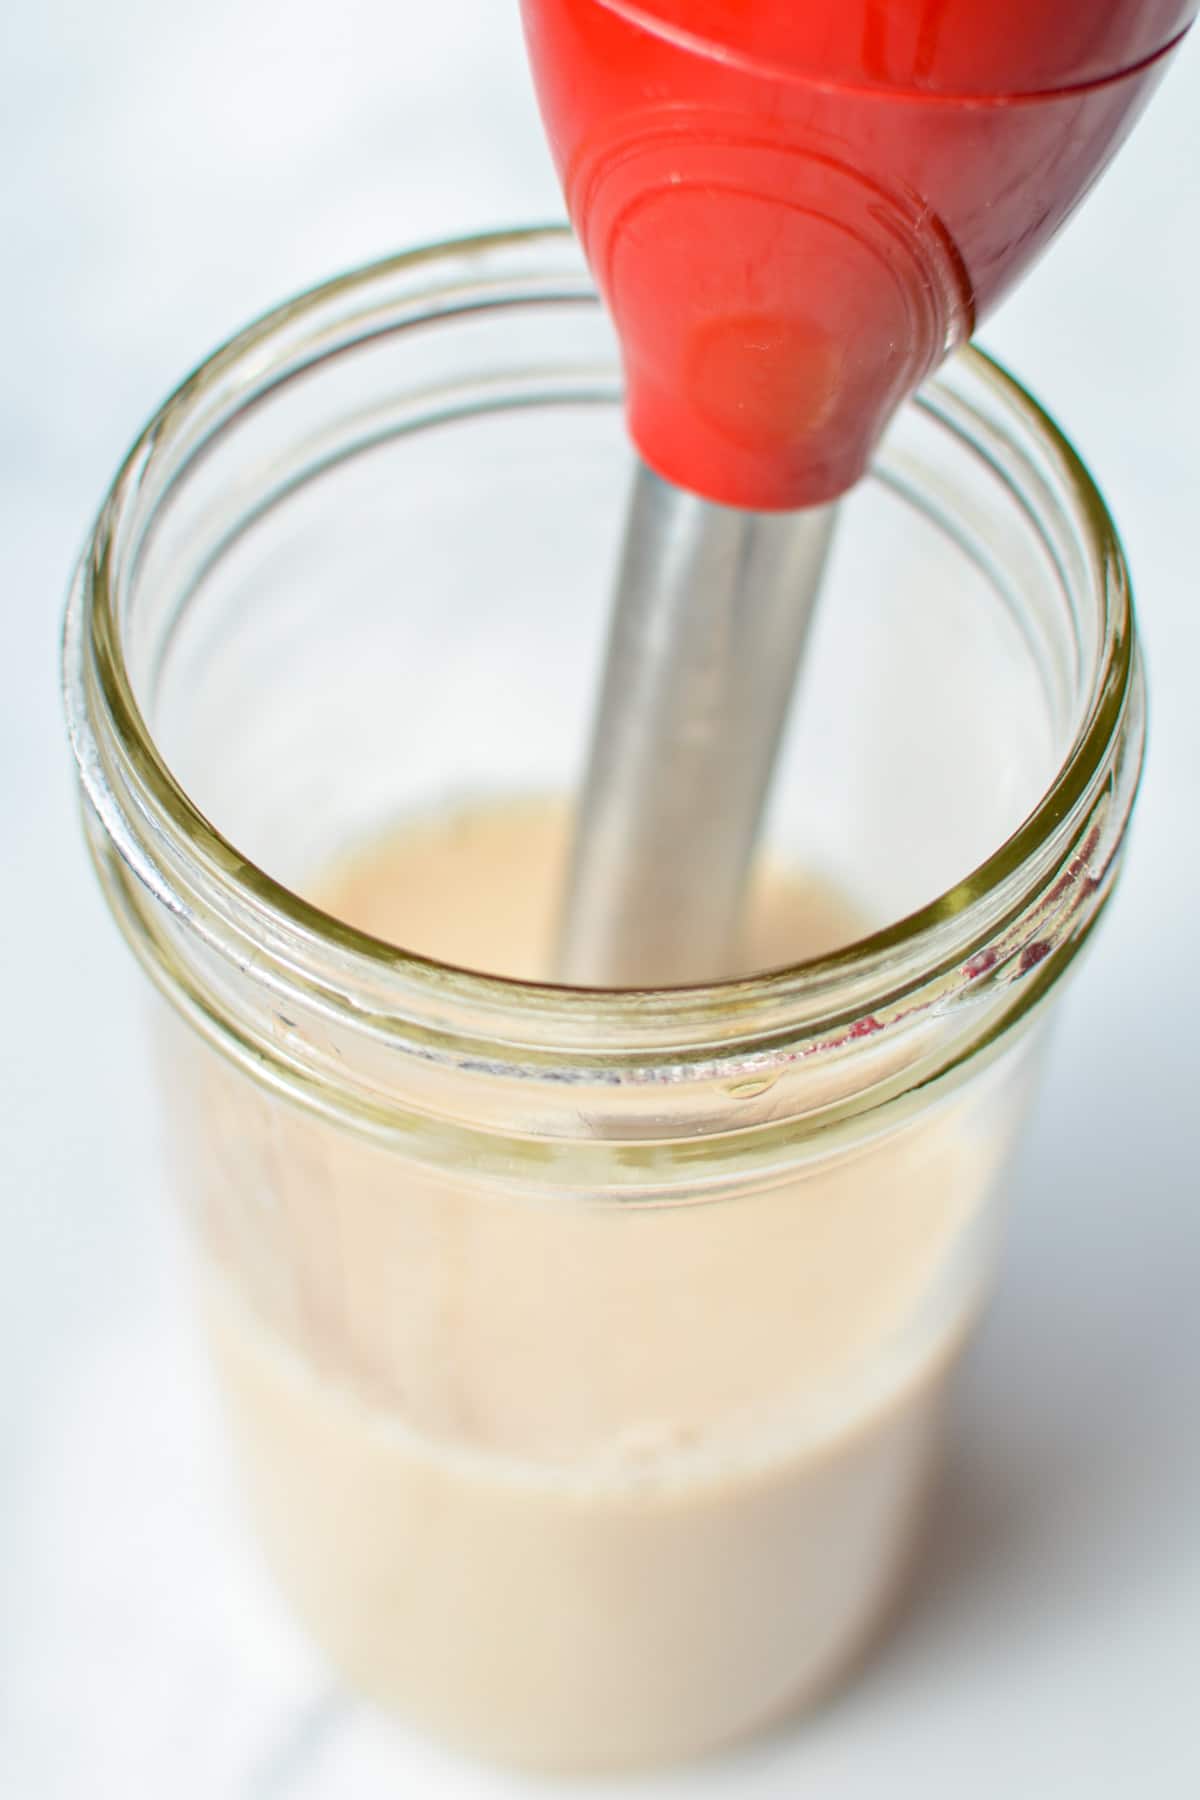 Adding an immersion blender to a jar of tea and milk.